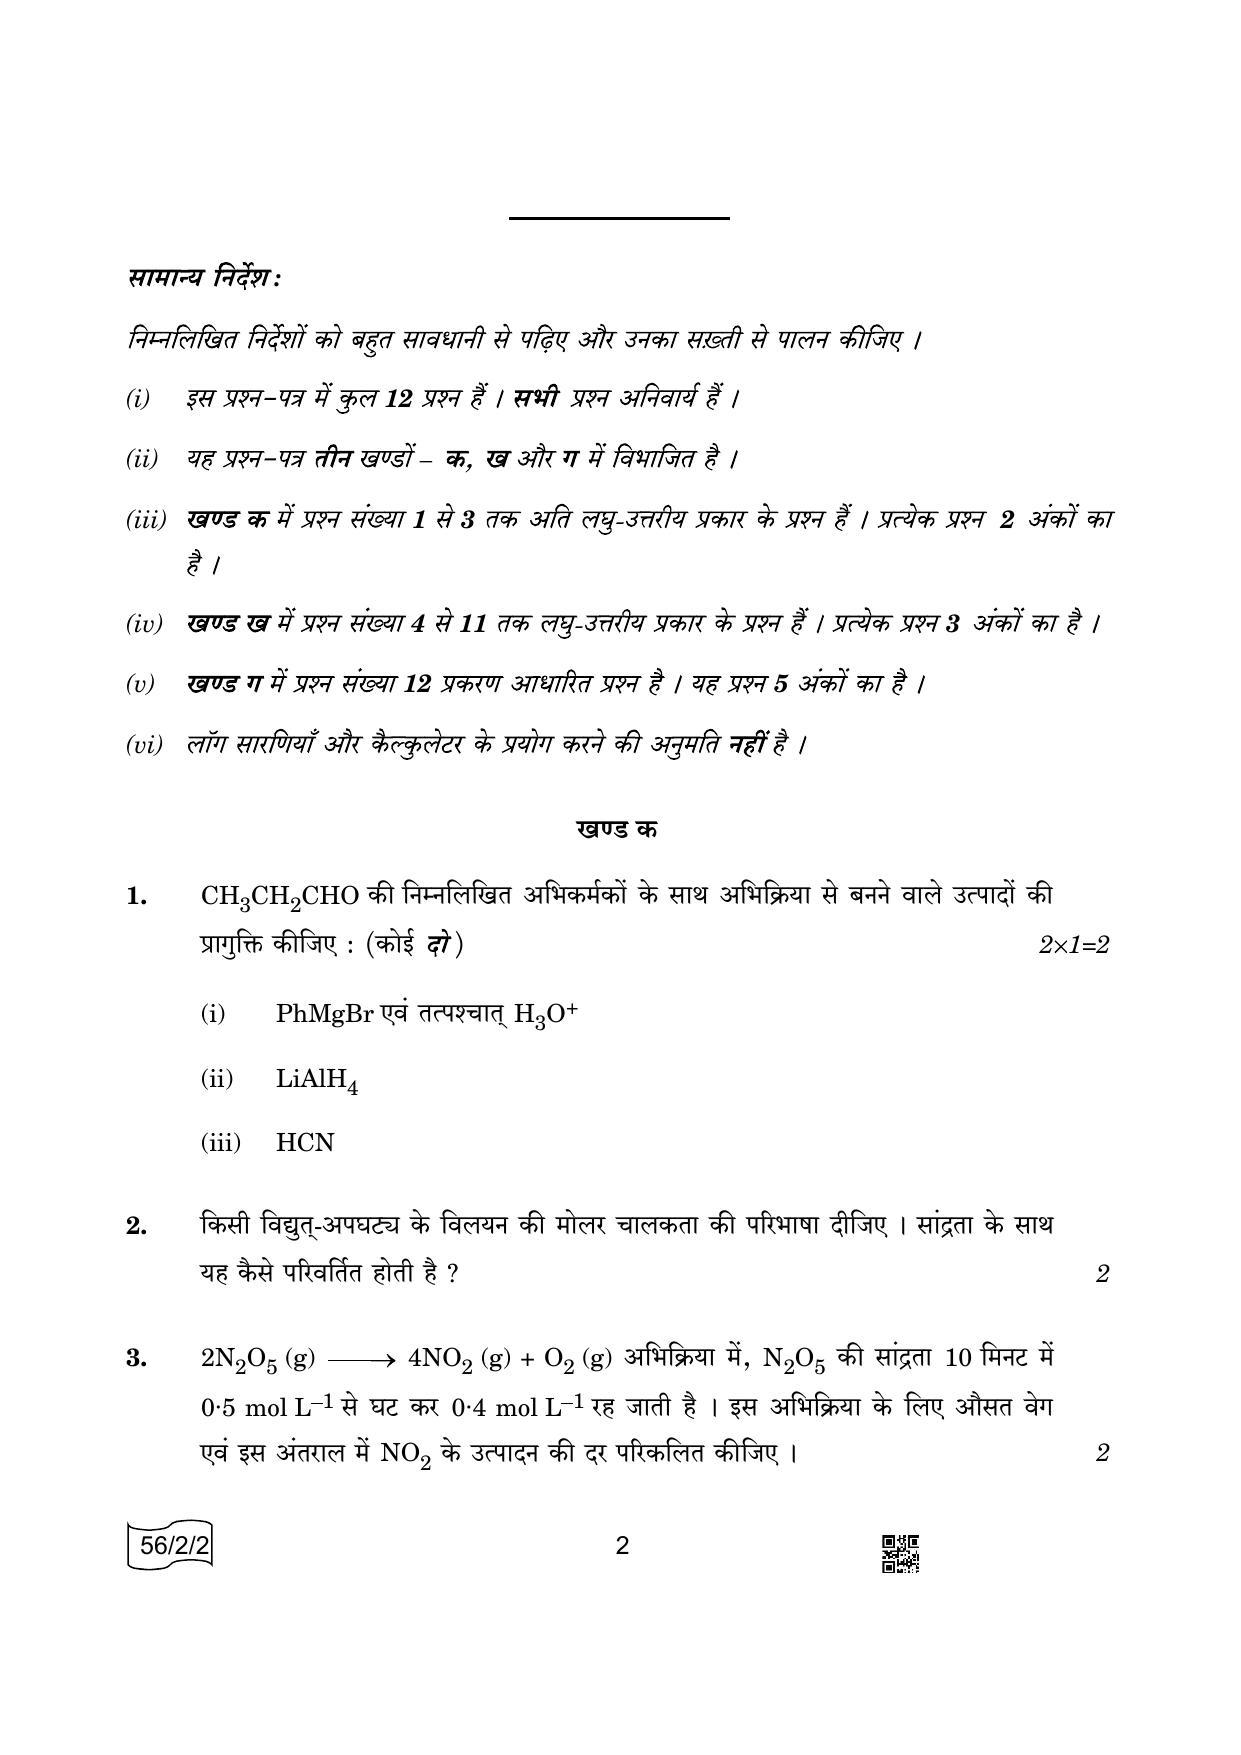 CBSE Class 12 56-2-2 Chemistry 2022 Question Paper - Page 2